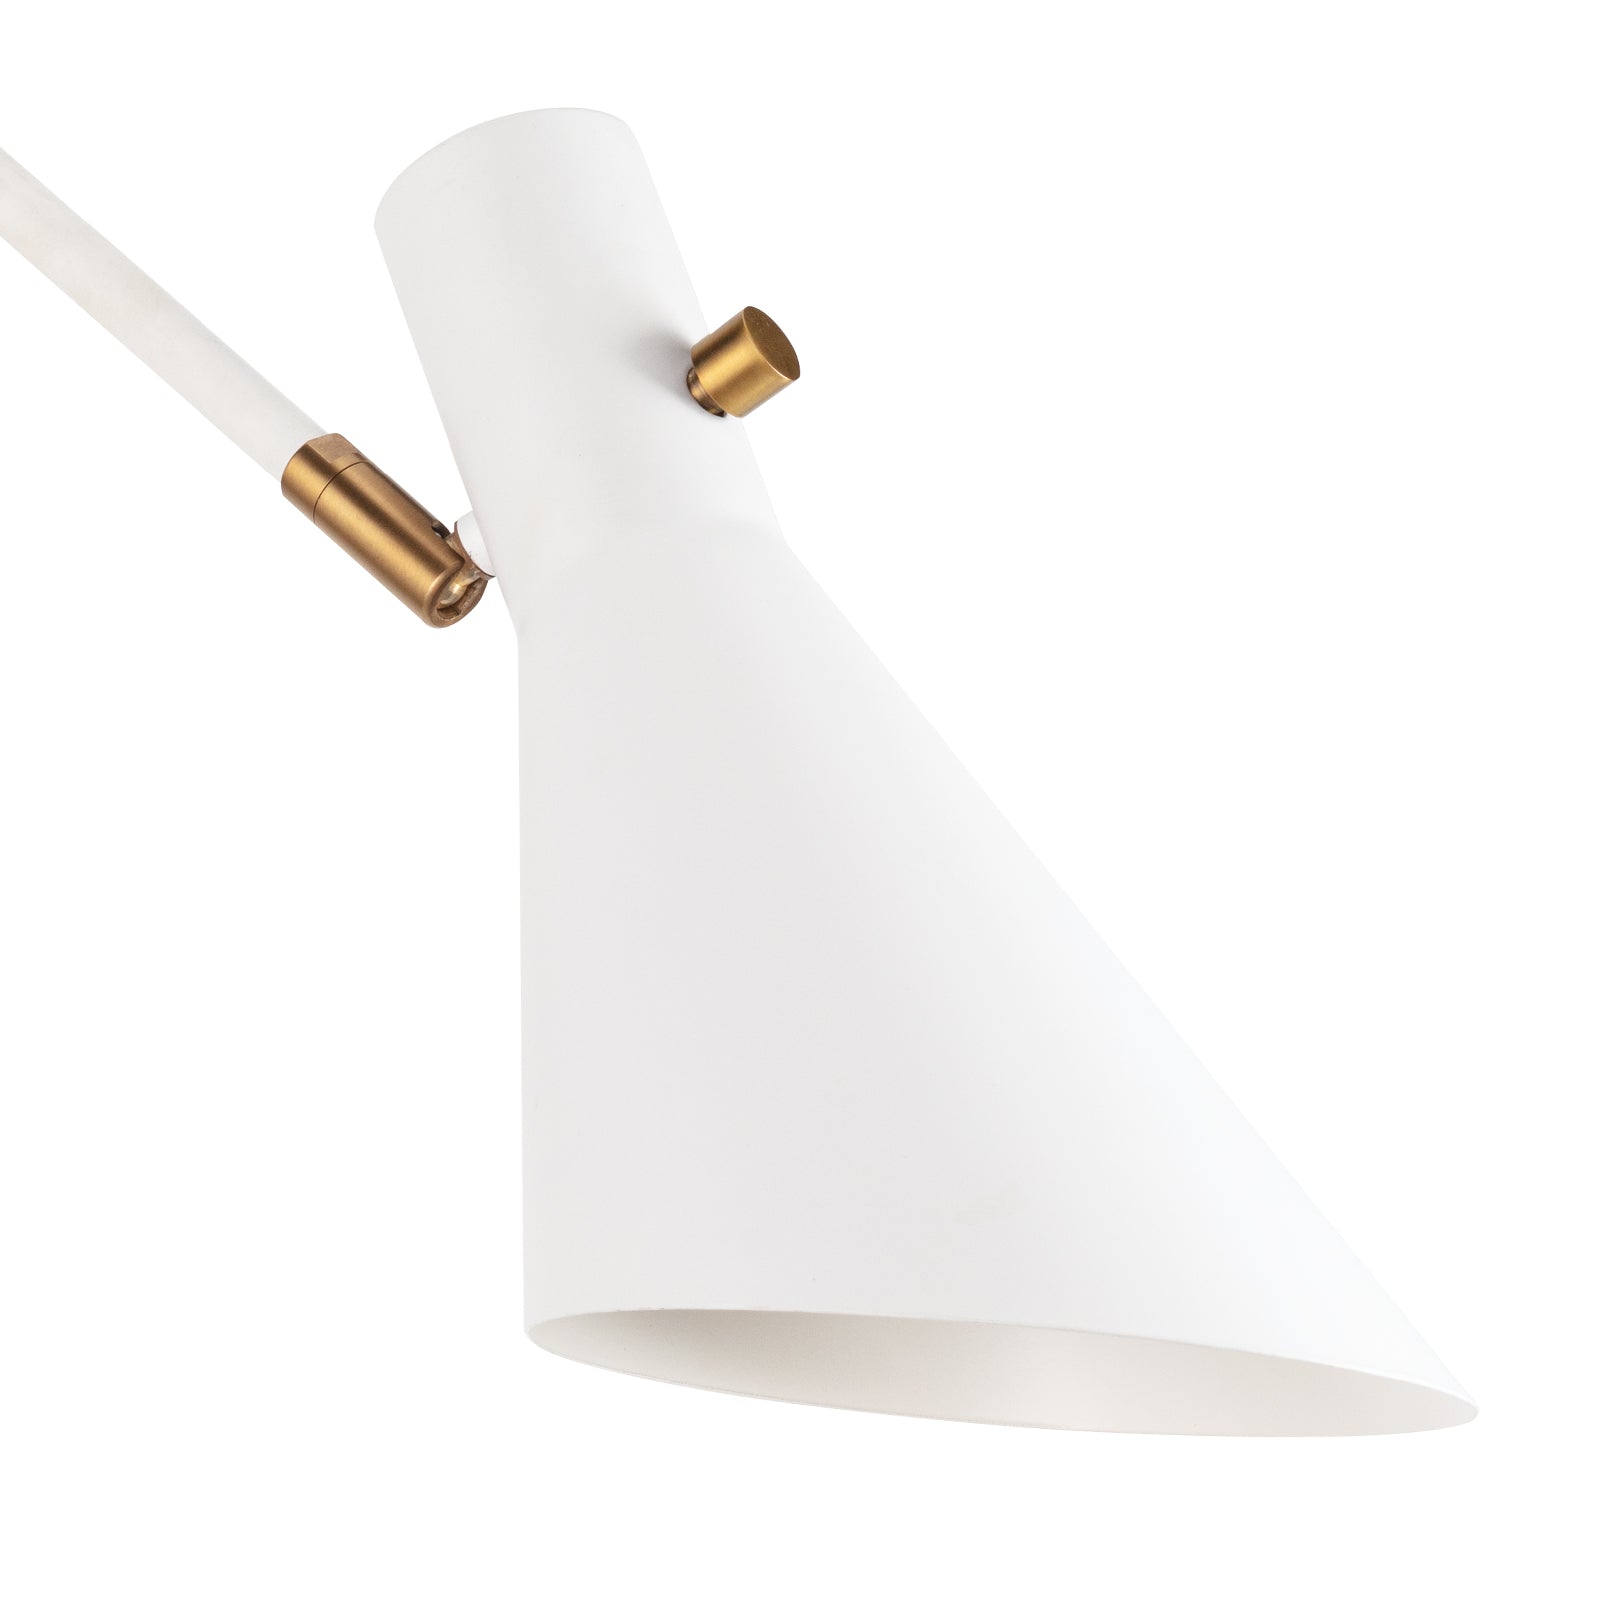 Spyder Single Arm Sconce in White and Natural Brass by Regina Andrew